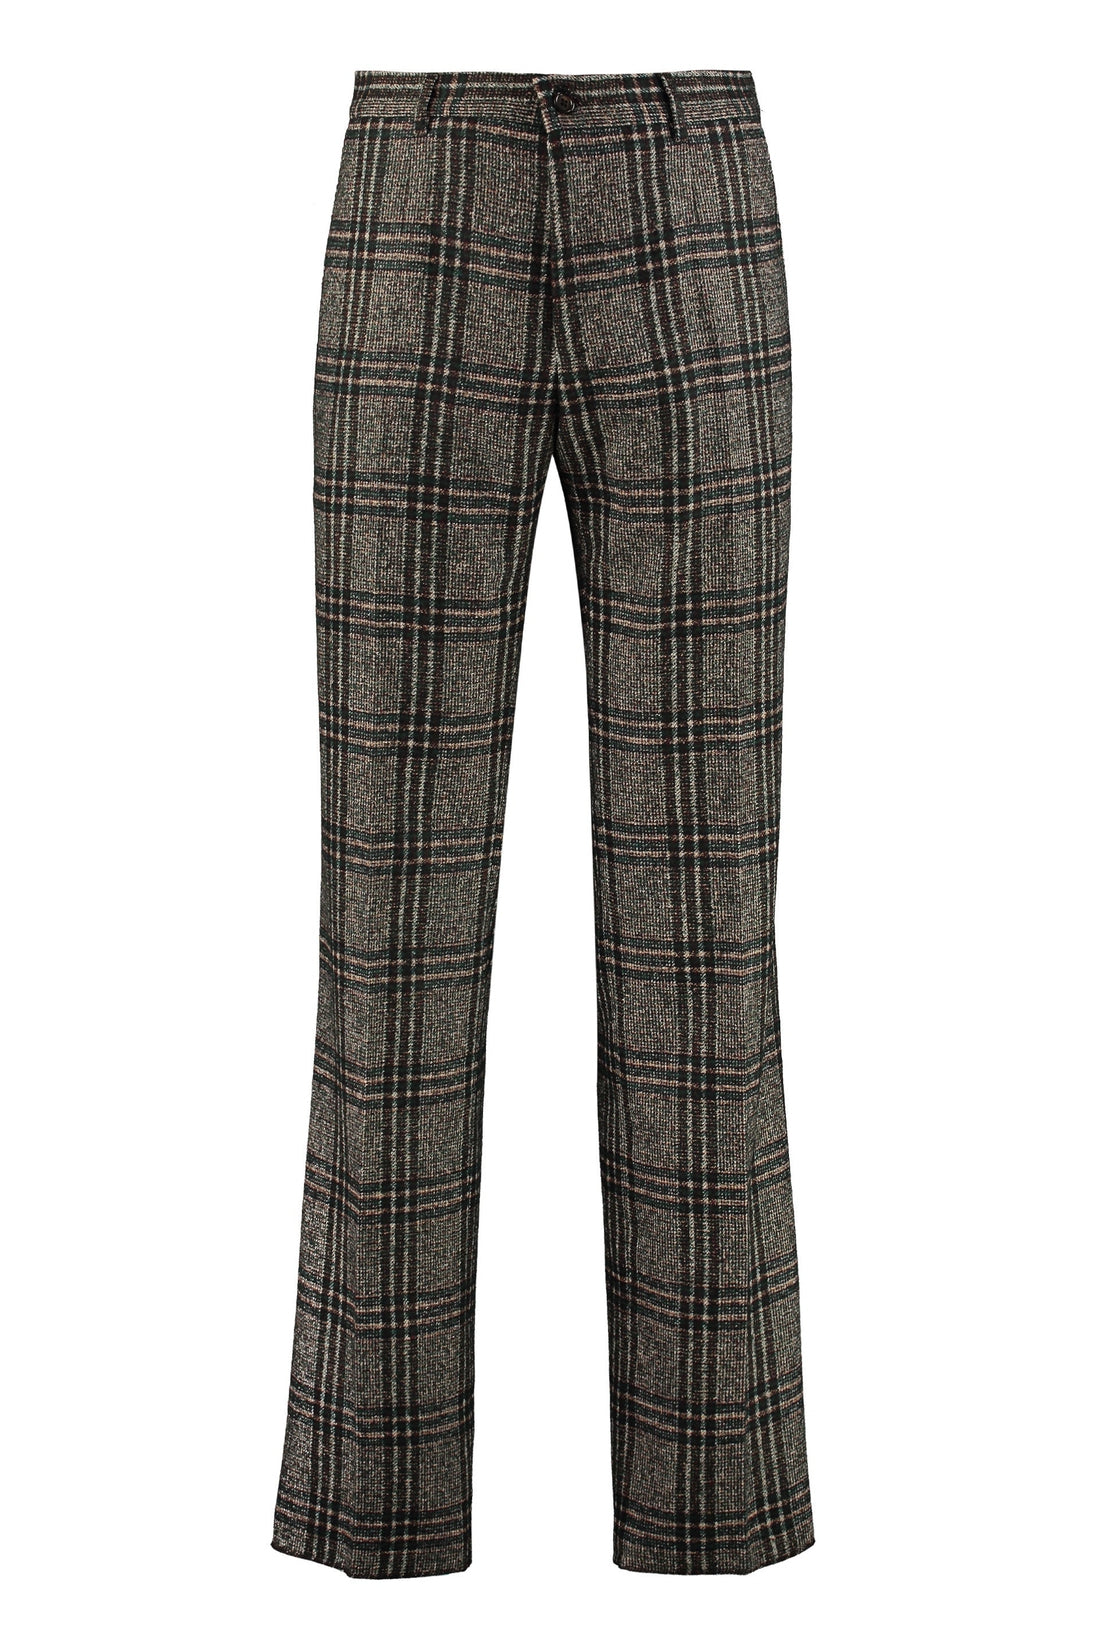 Dolce & Gabbana-OUTLET-SALE-Prince of Wales check trousers-ARCHIVIST